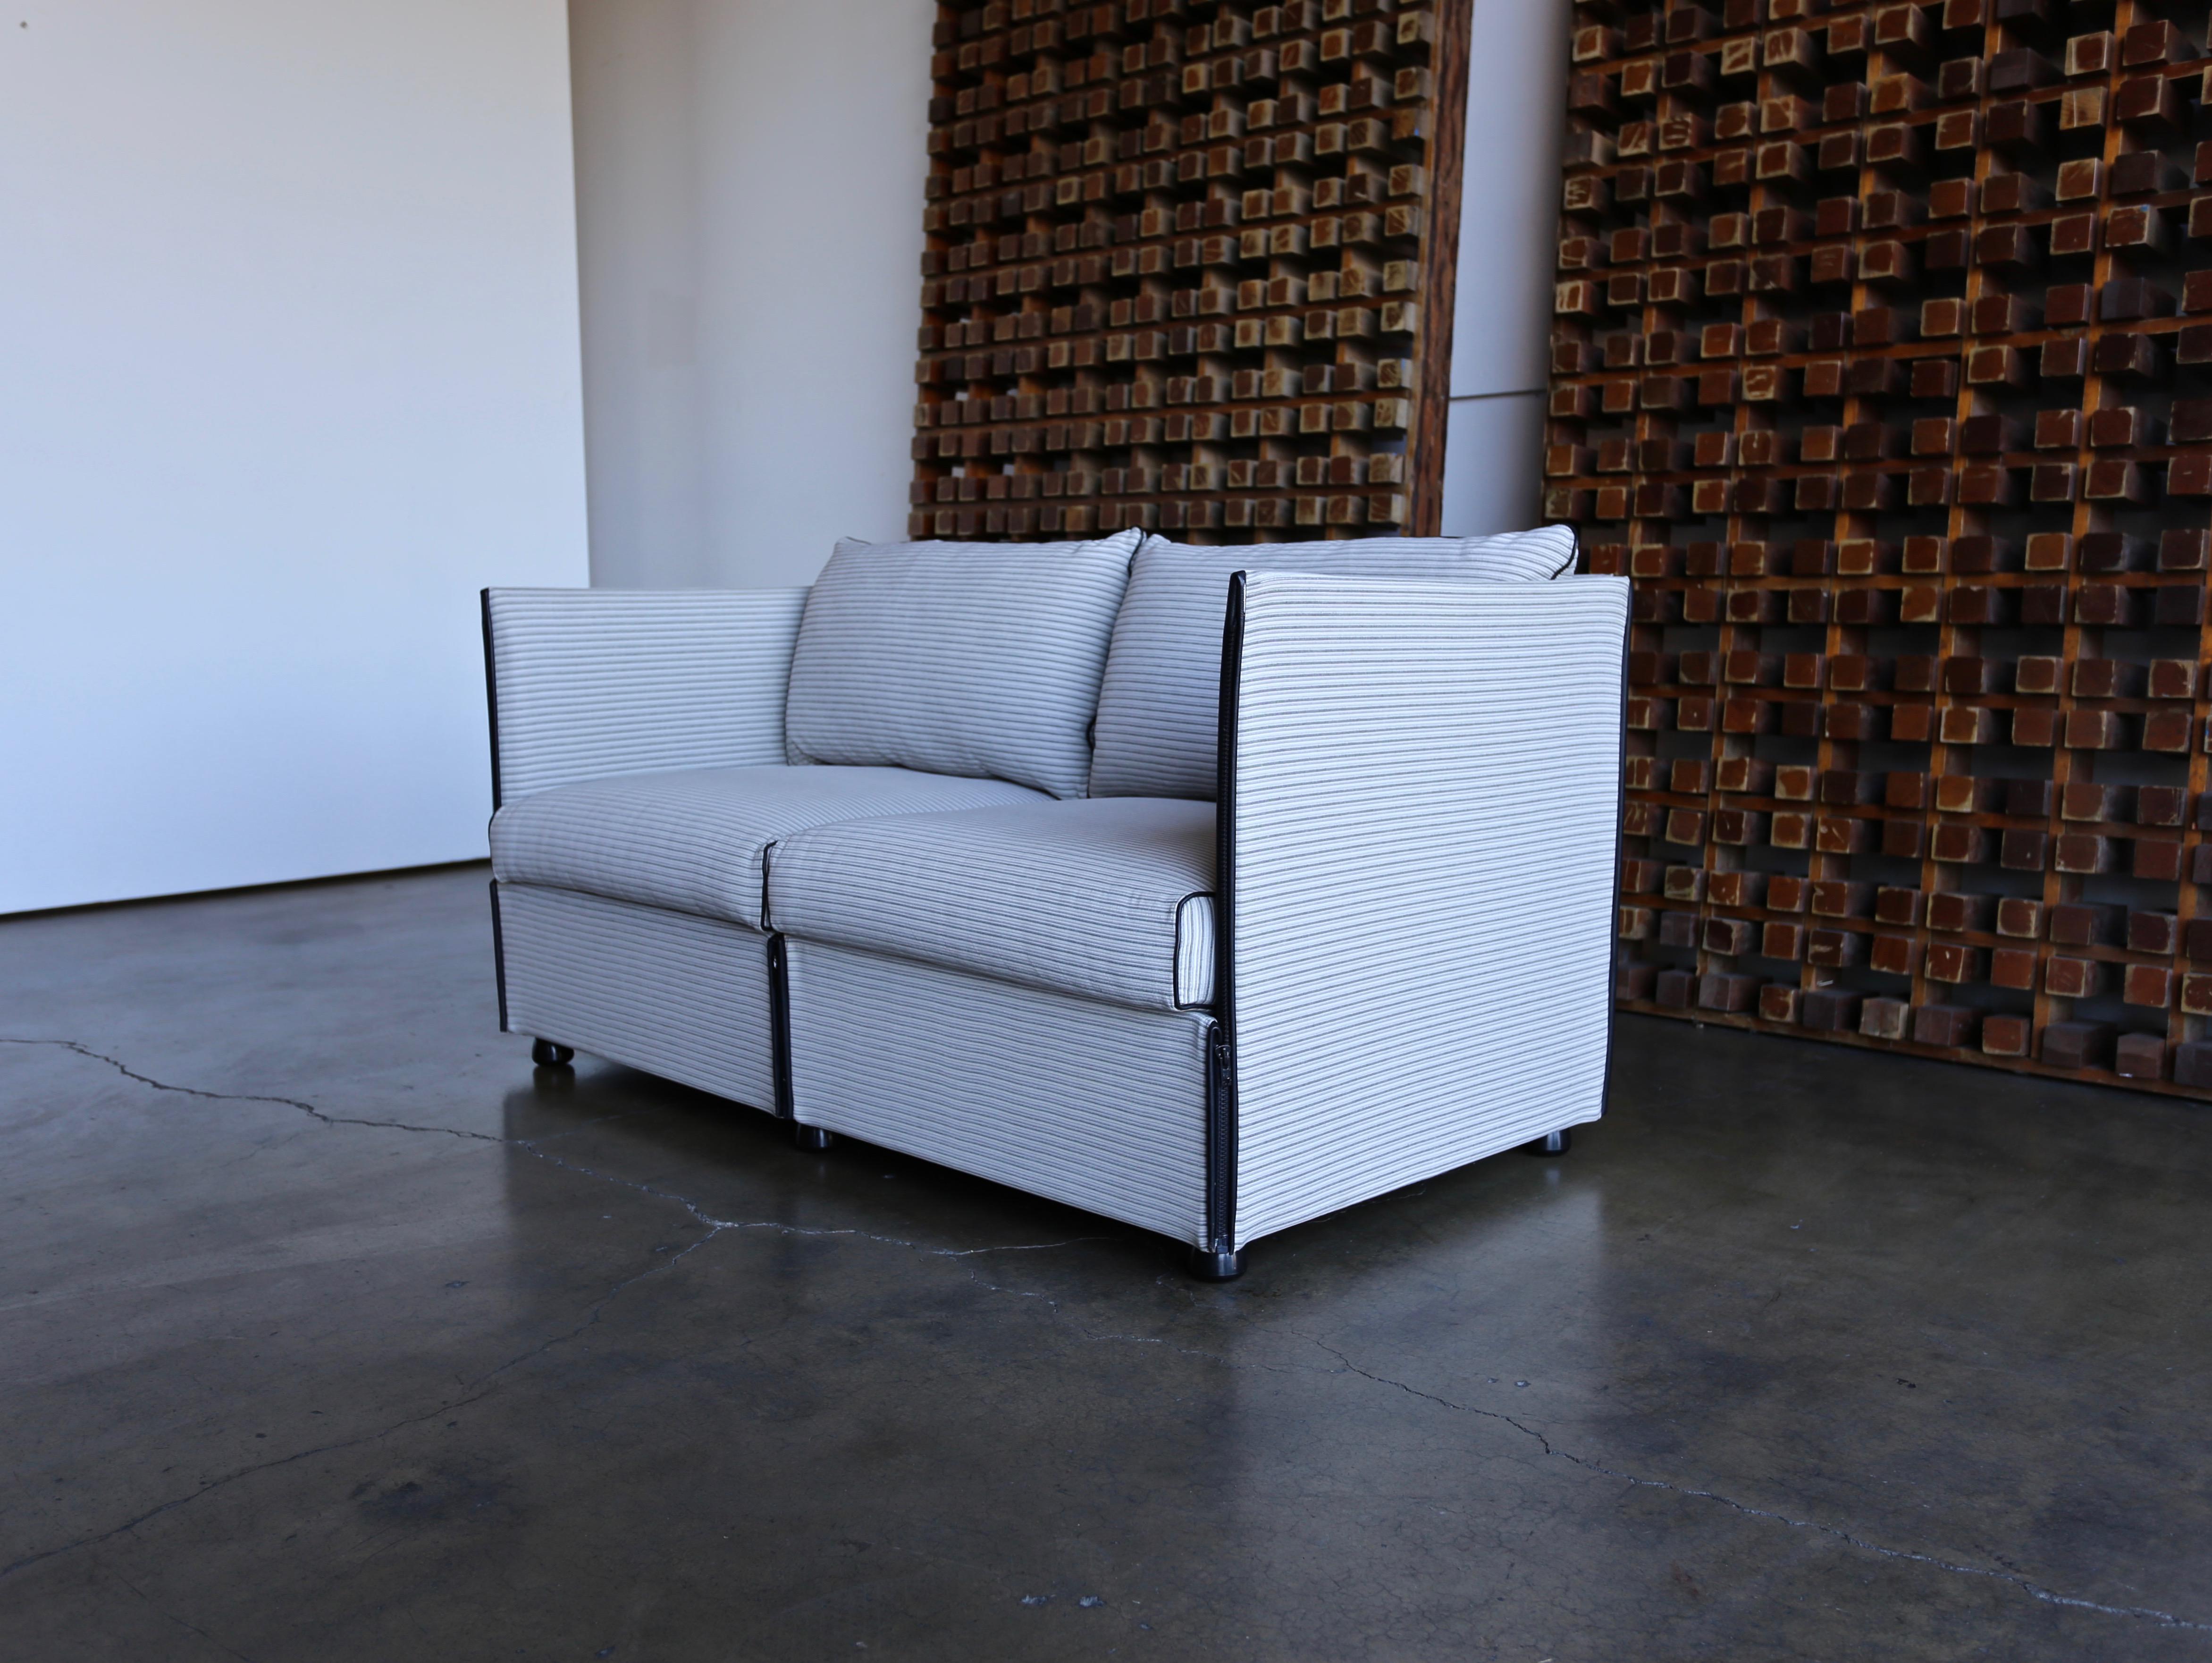 Char-a-Banc Settee sofa by Mario Bellini for Cassina.